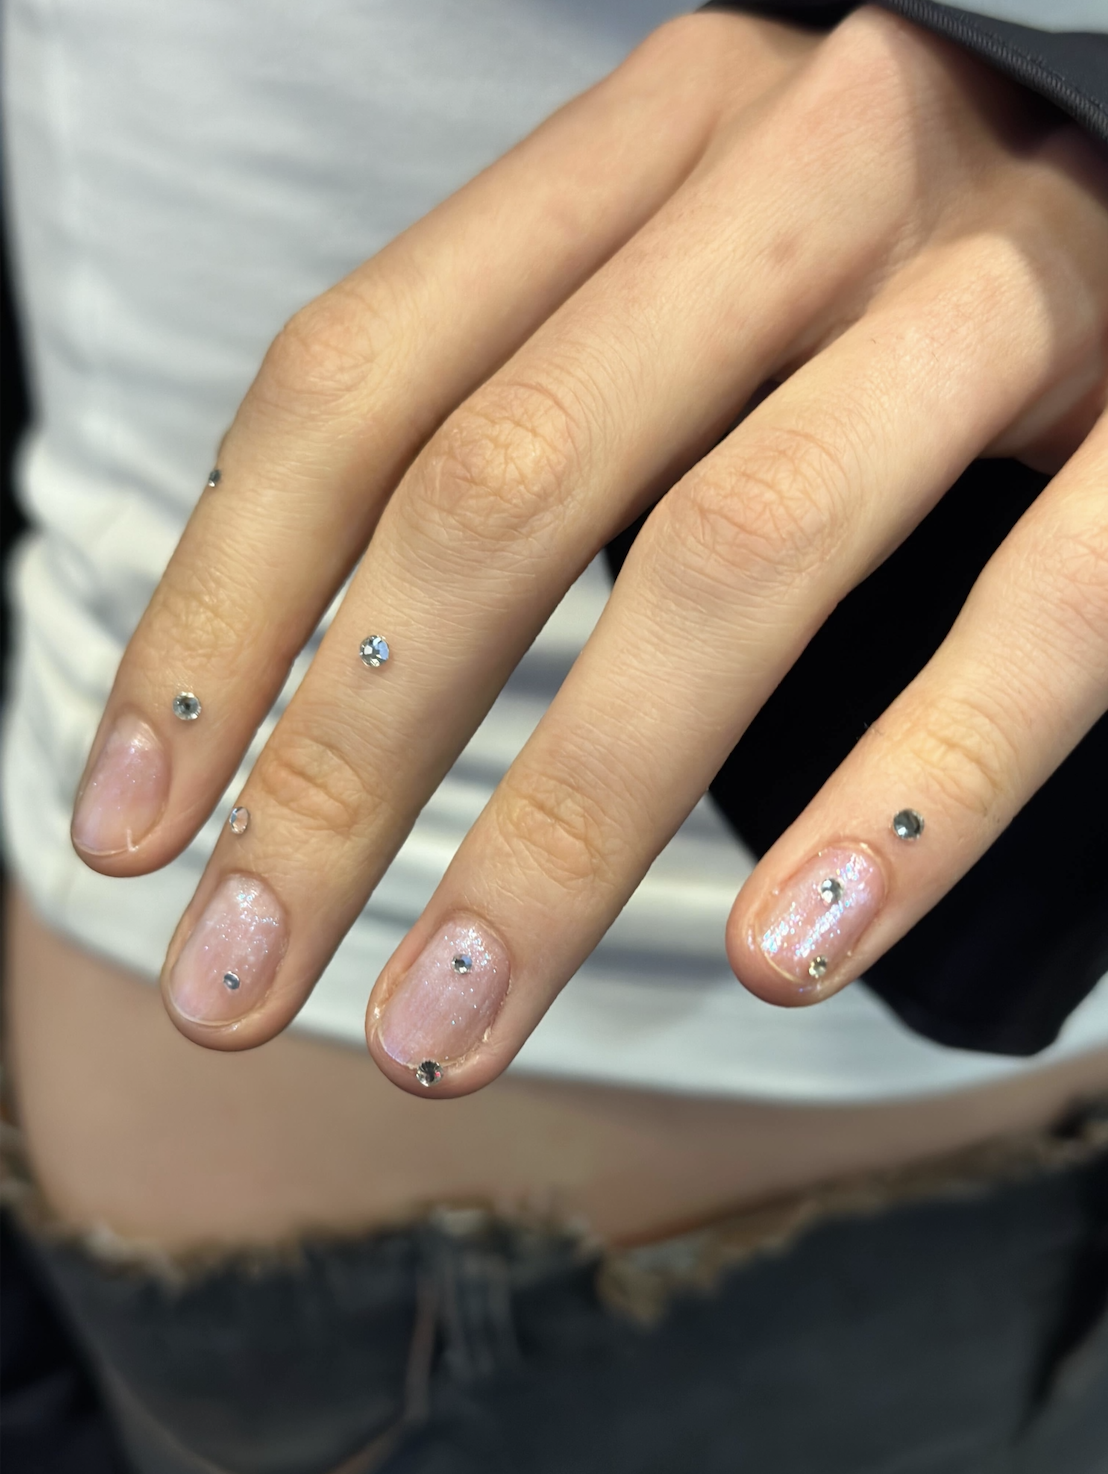 Blueberry Milk Nails Are This Summer's Latest Manicure Trend: Here's How to  Get the Look at Home